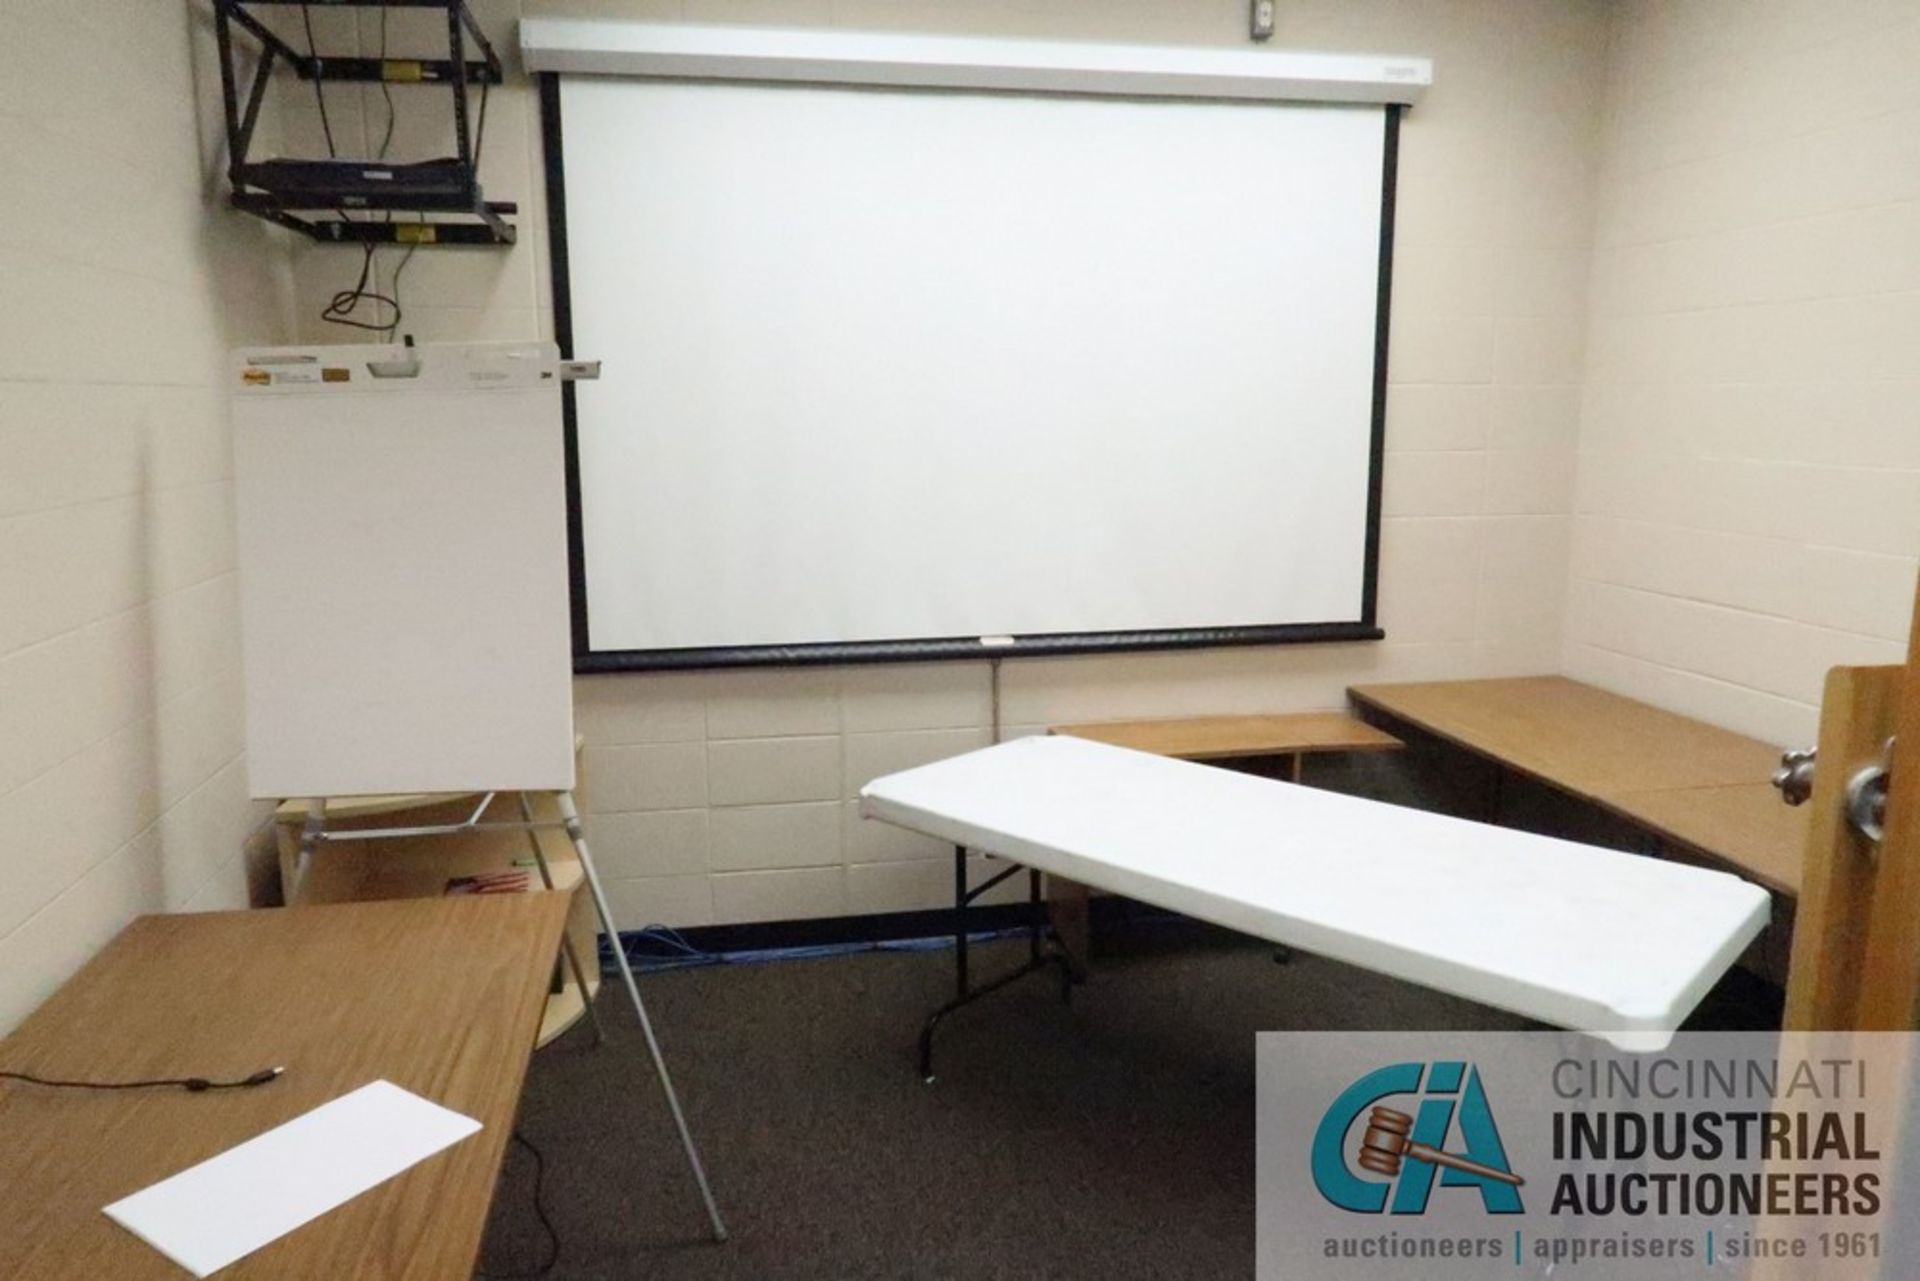 (LOT) (9) 48" TABLES, 6' FOLDING TABLE, BOOKSHELF, (10) CHAIRS, CHALK/DRY BOARD, PROJECTOR SCREEN - Image 4 of 6